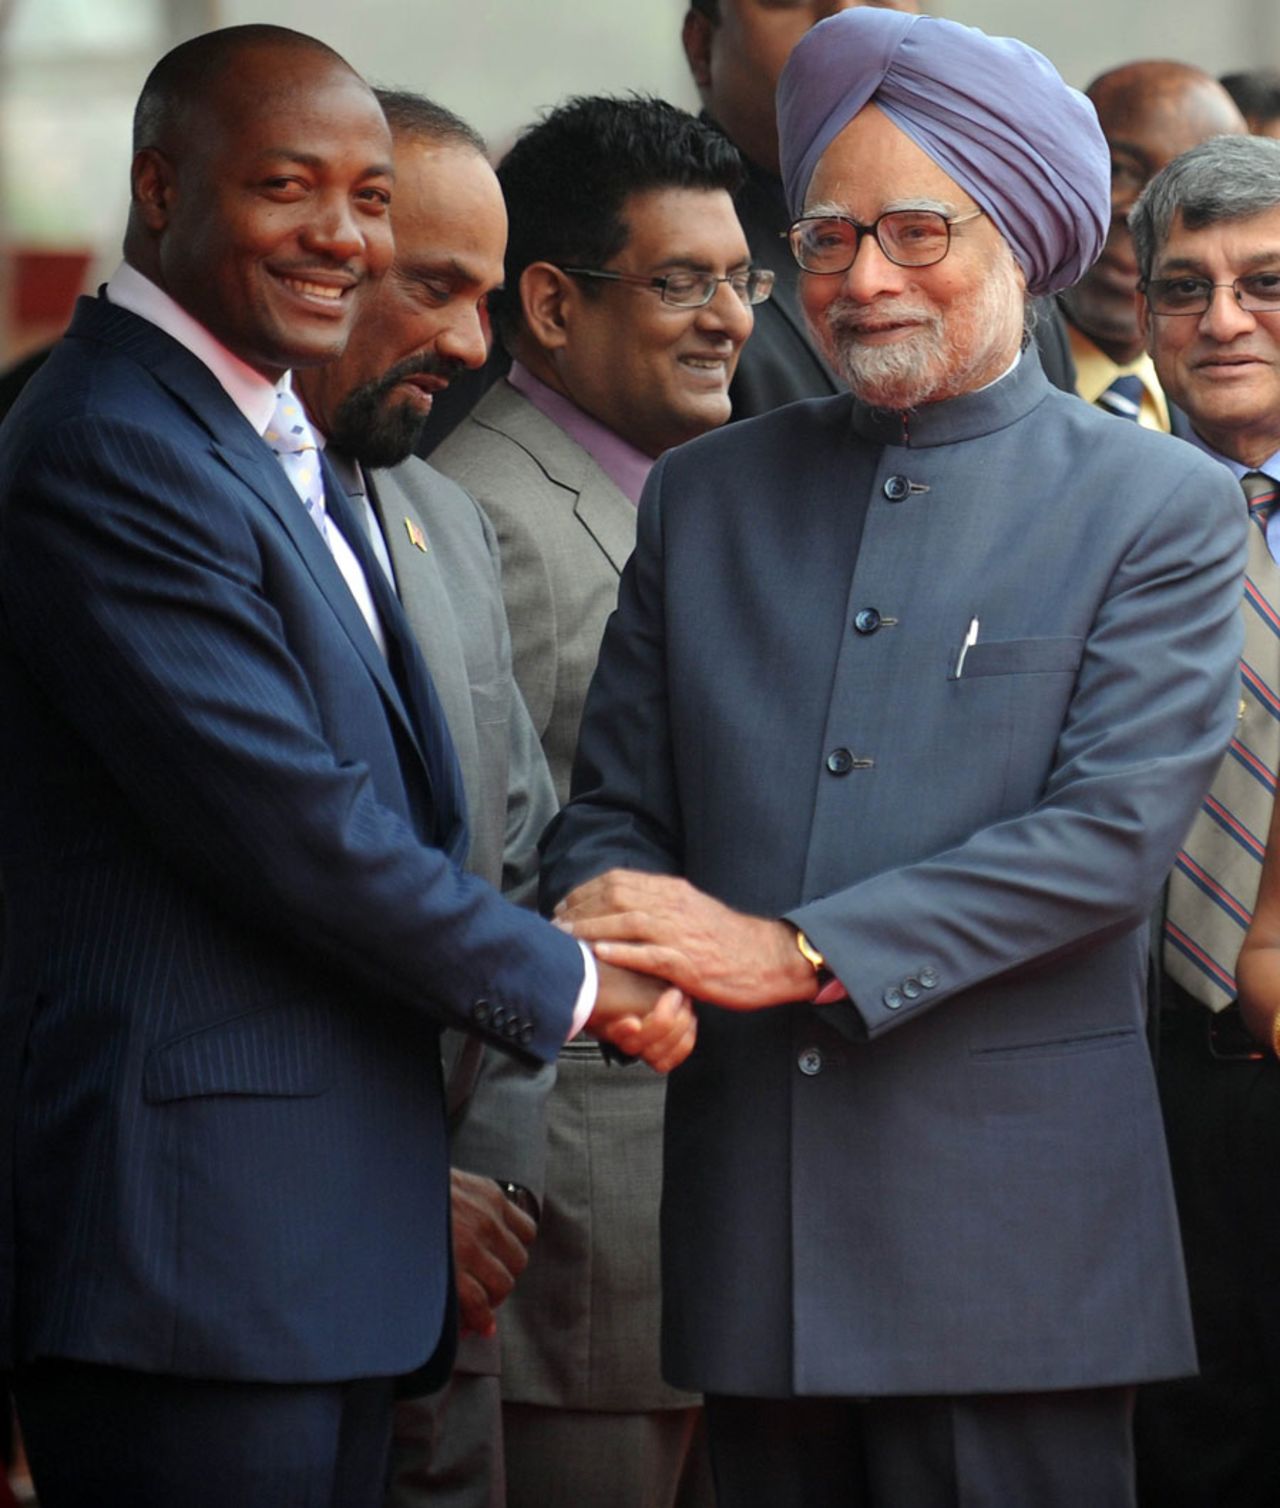 Brian Lara meets Indian prime minister Manmohan Singh at the closing ceremony of the Overseas Indian Congress, Jaipur, January 9, 2012